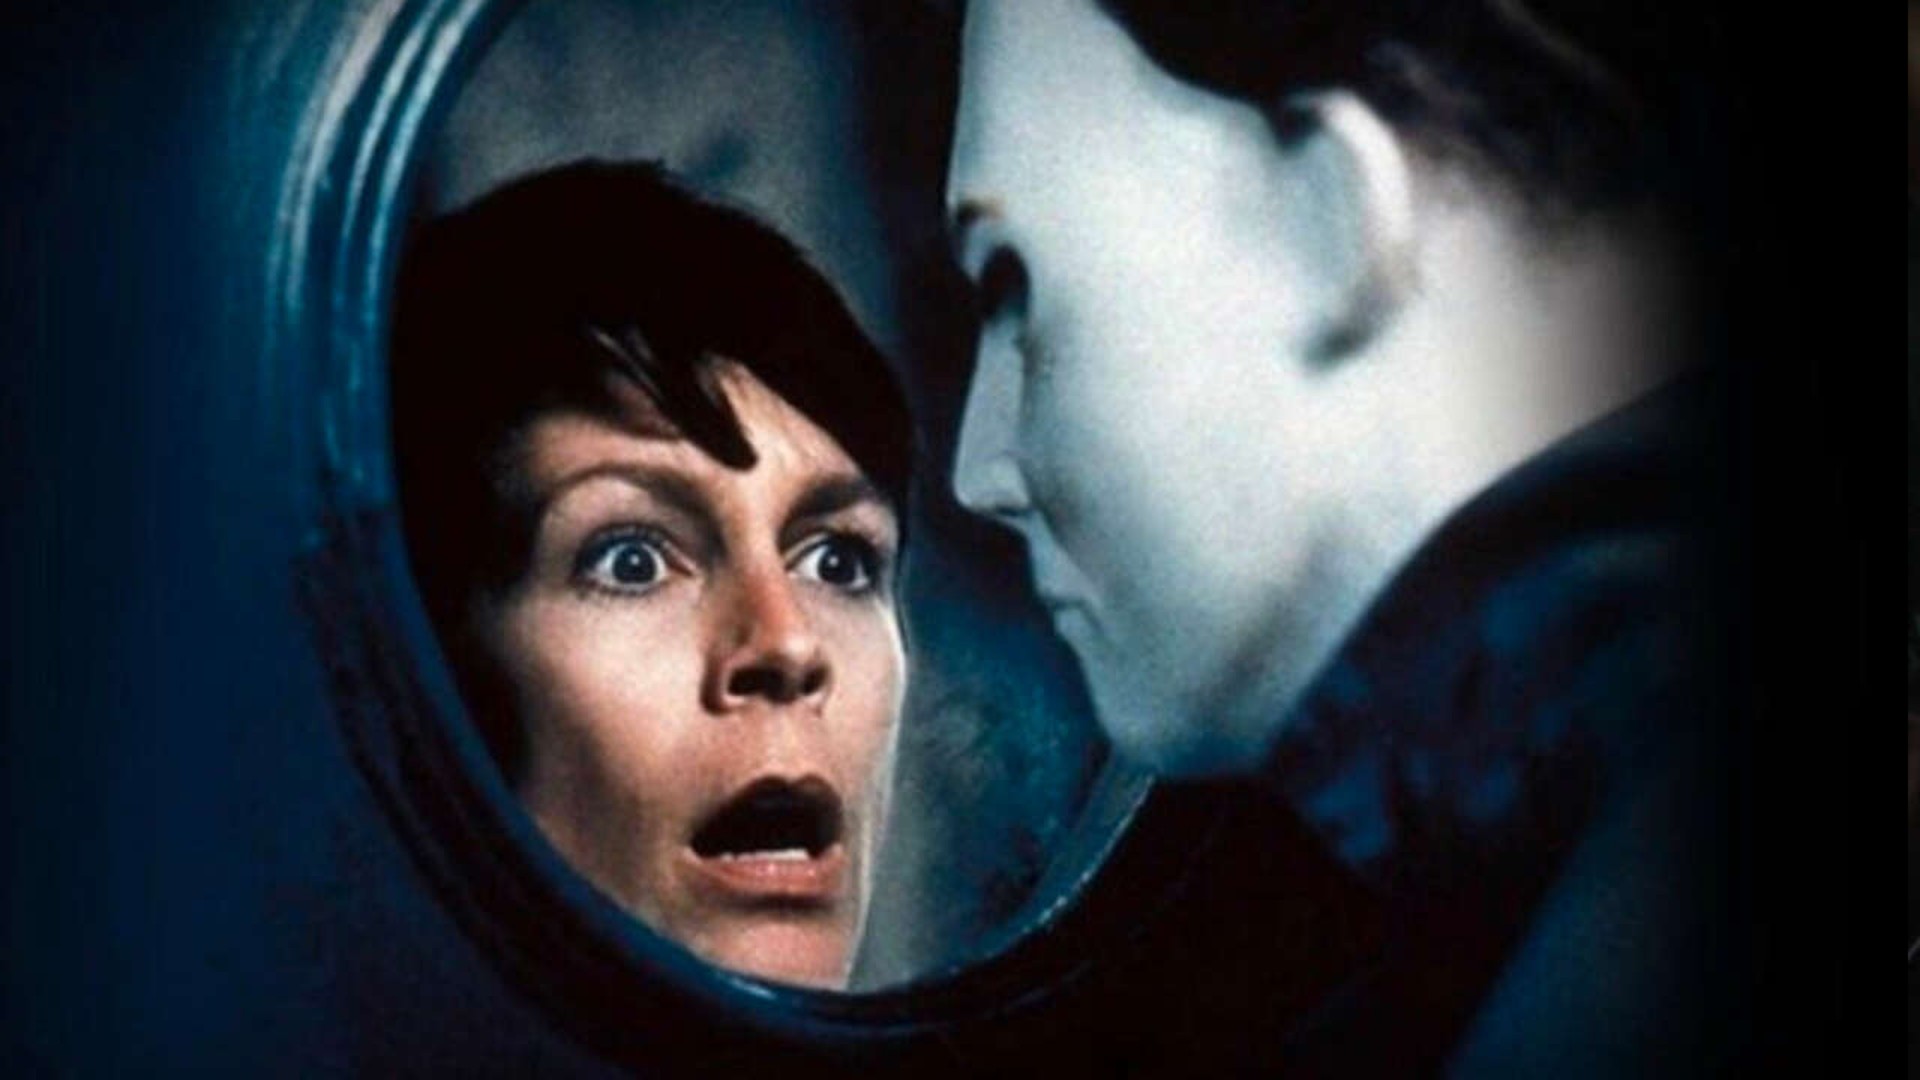 Jamie Lee Curtis stares with horror through a round window at the masked face of Michael Myers.